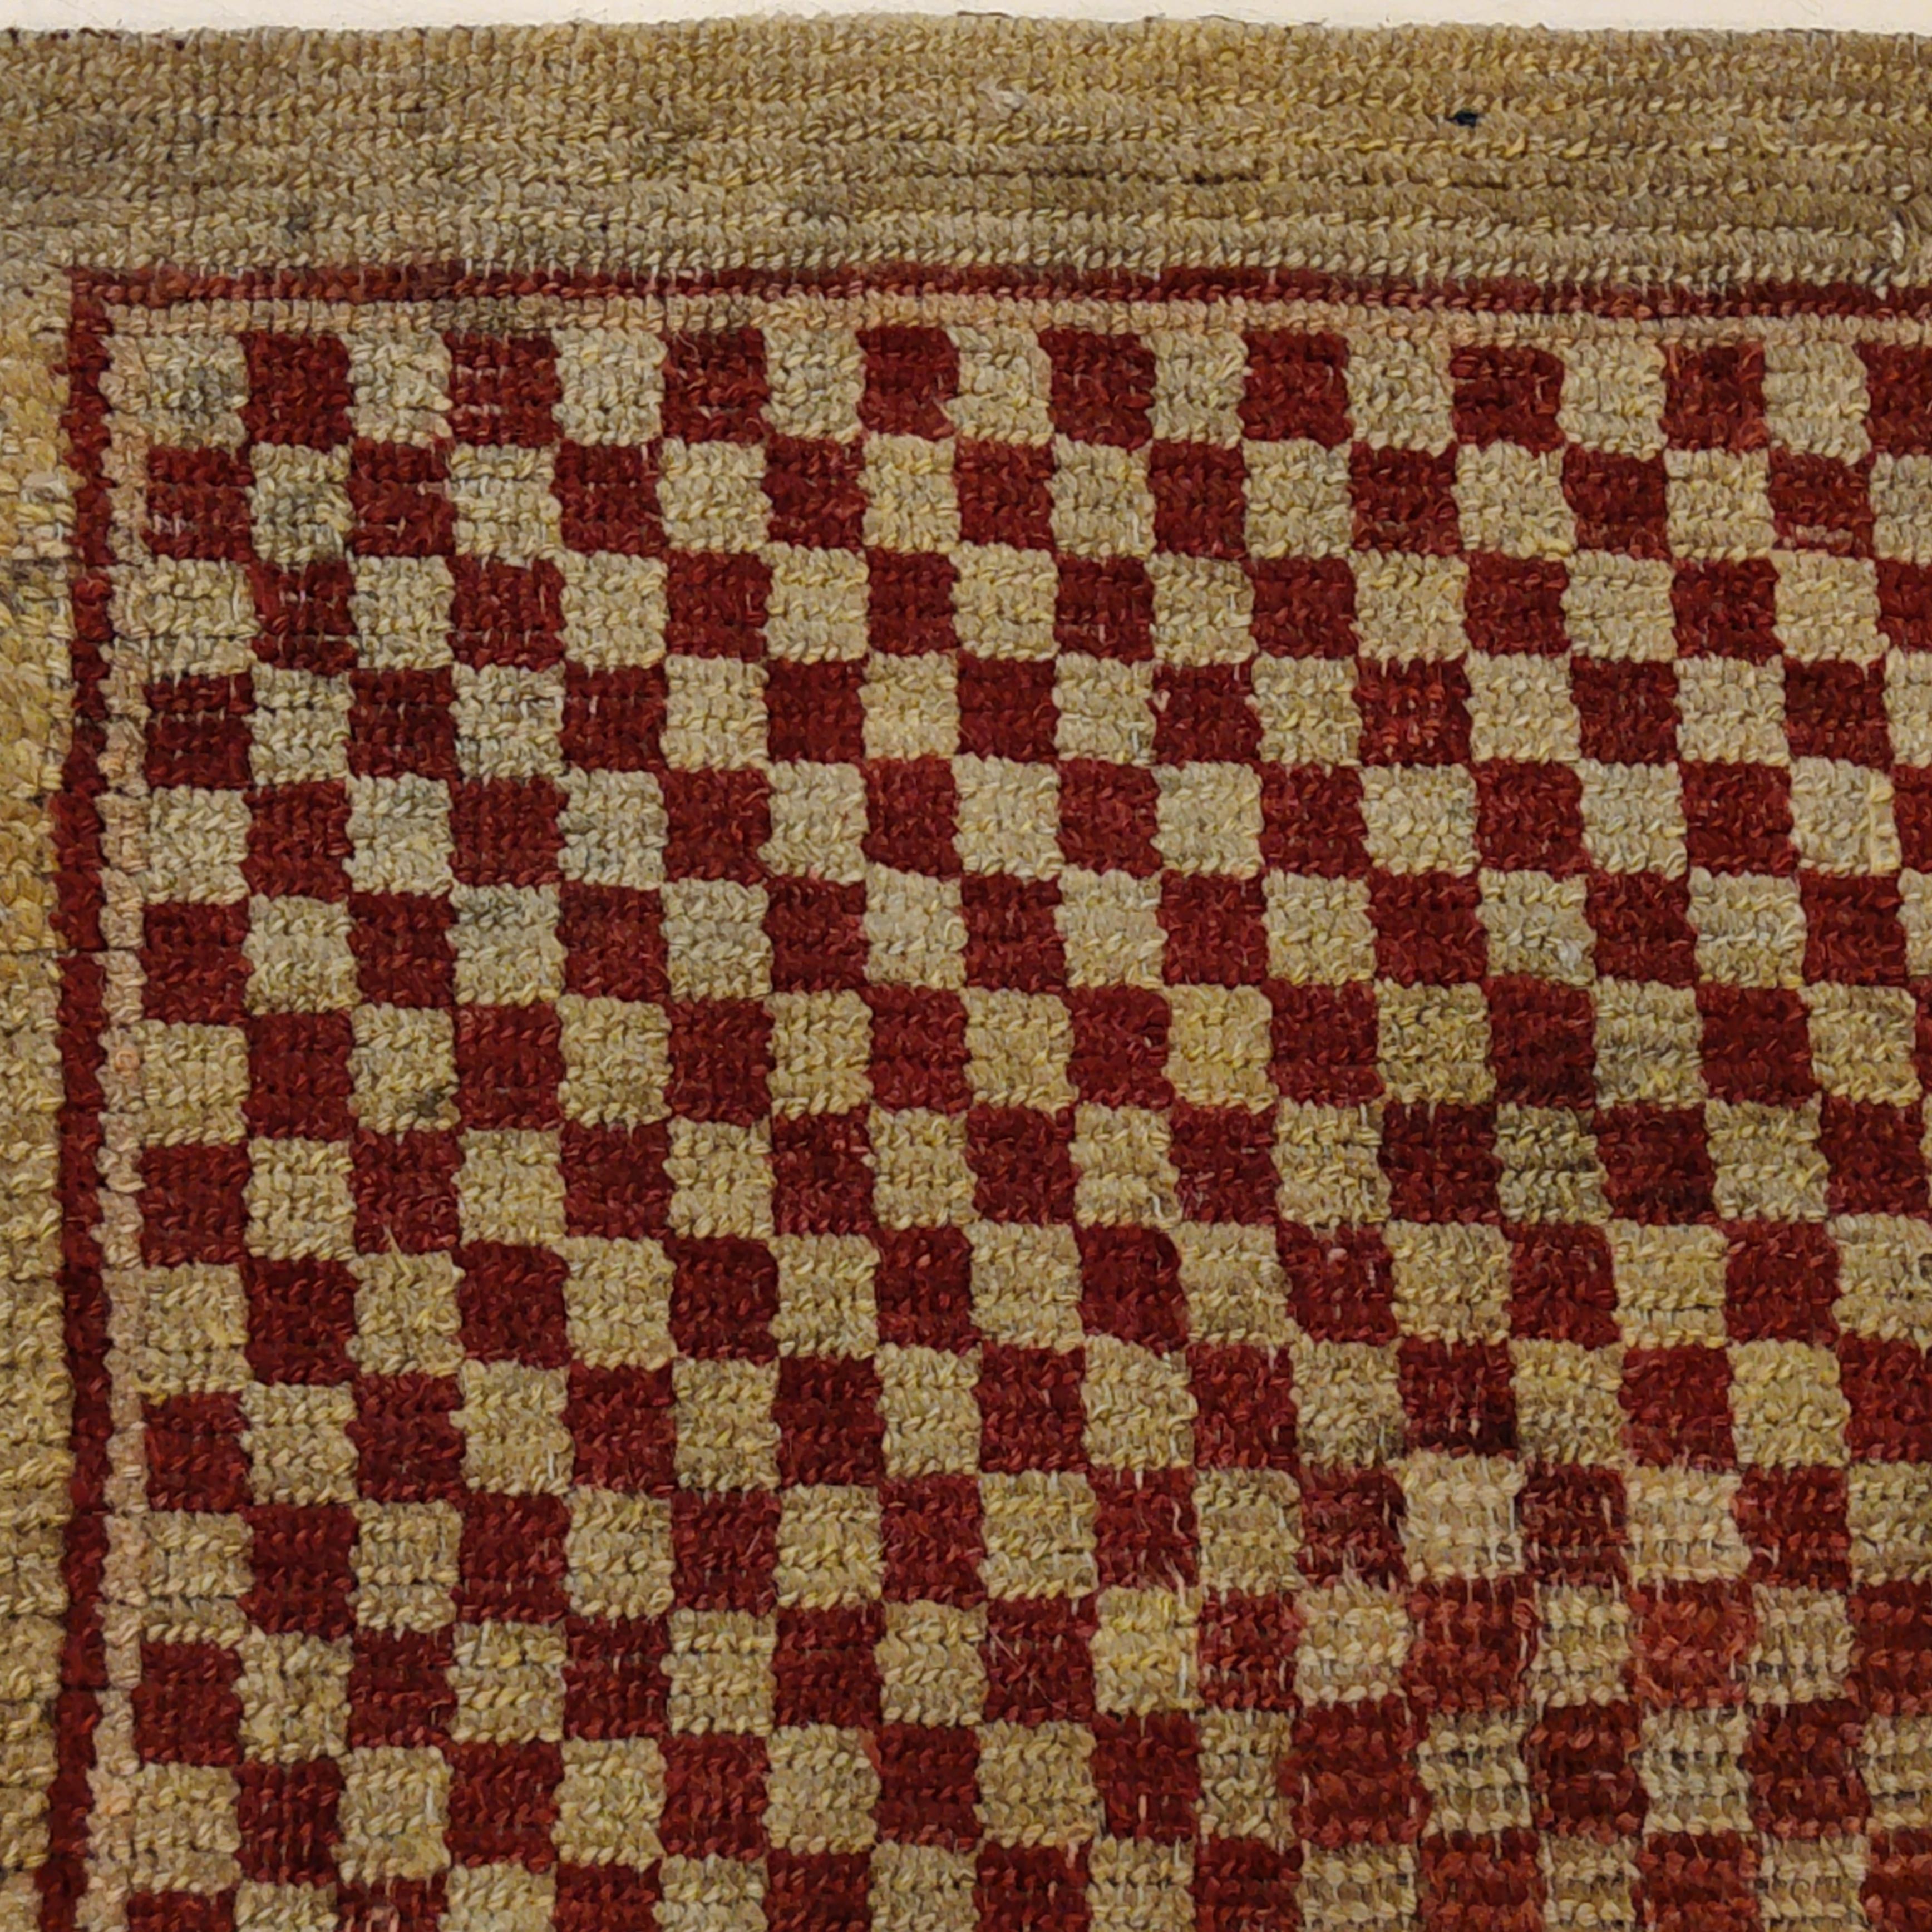 Checkerboard rugs are among the most sought-after antique Tibetan weavings. Their appeal lies in the simplicity and, at the same time, sophistication of the geometric pattern, which is typically rendered in two contrasting colours, although the are